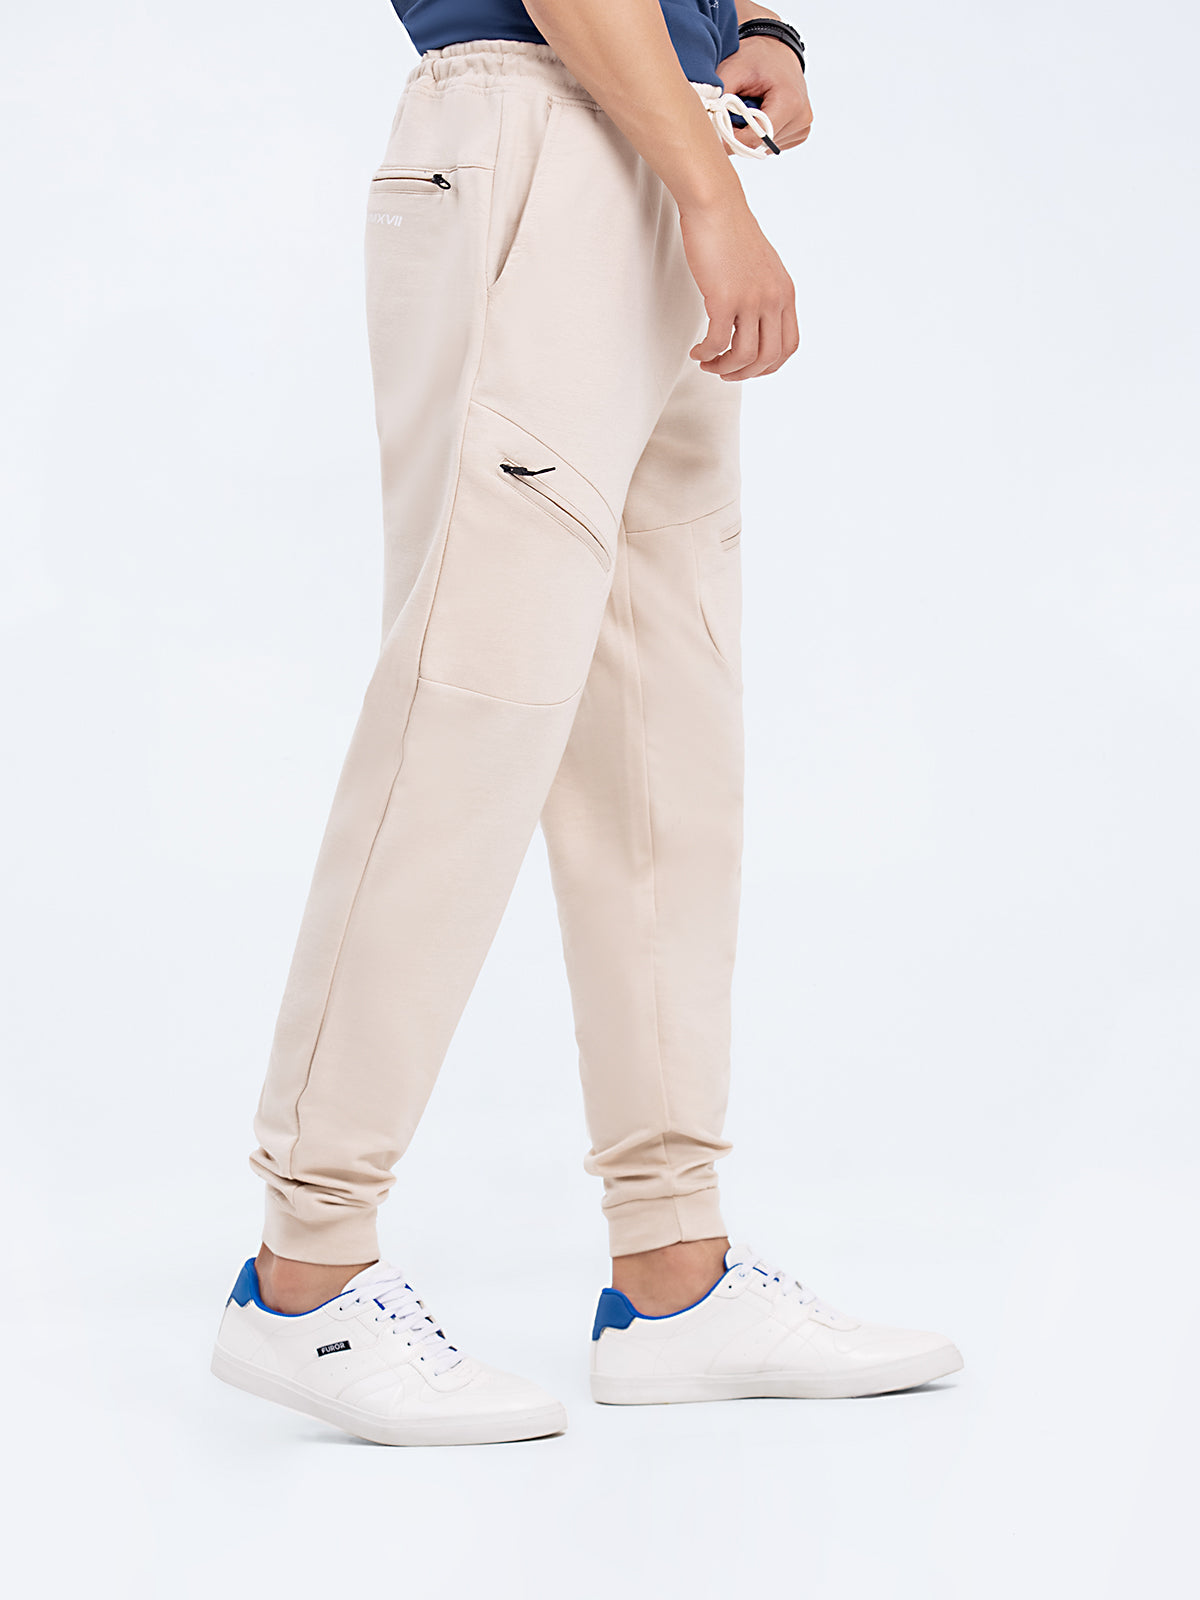 French Terry Joggers - FMBT24-005